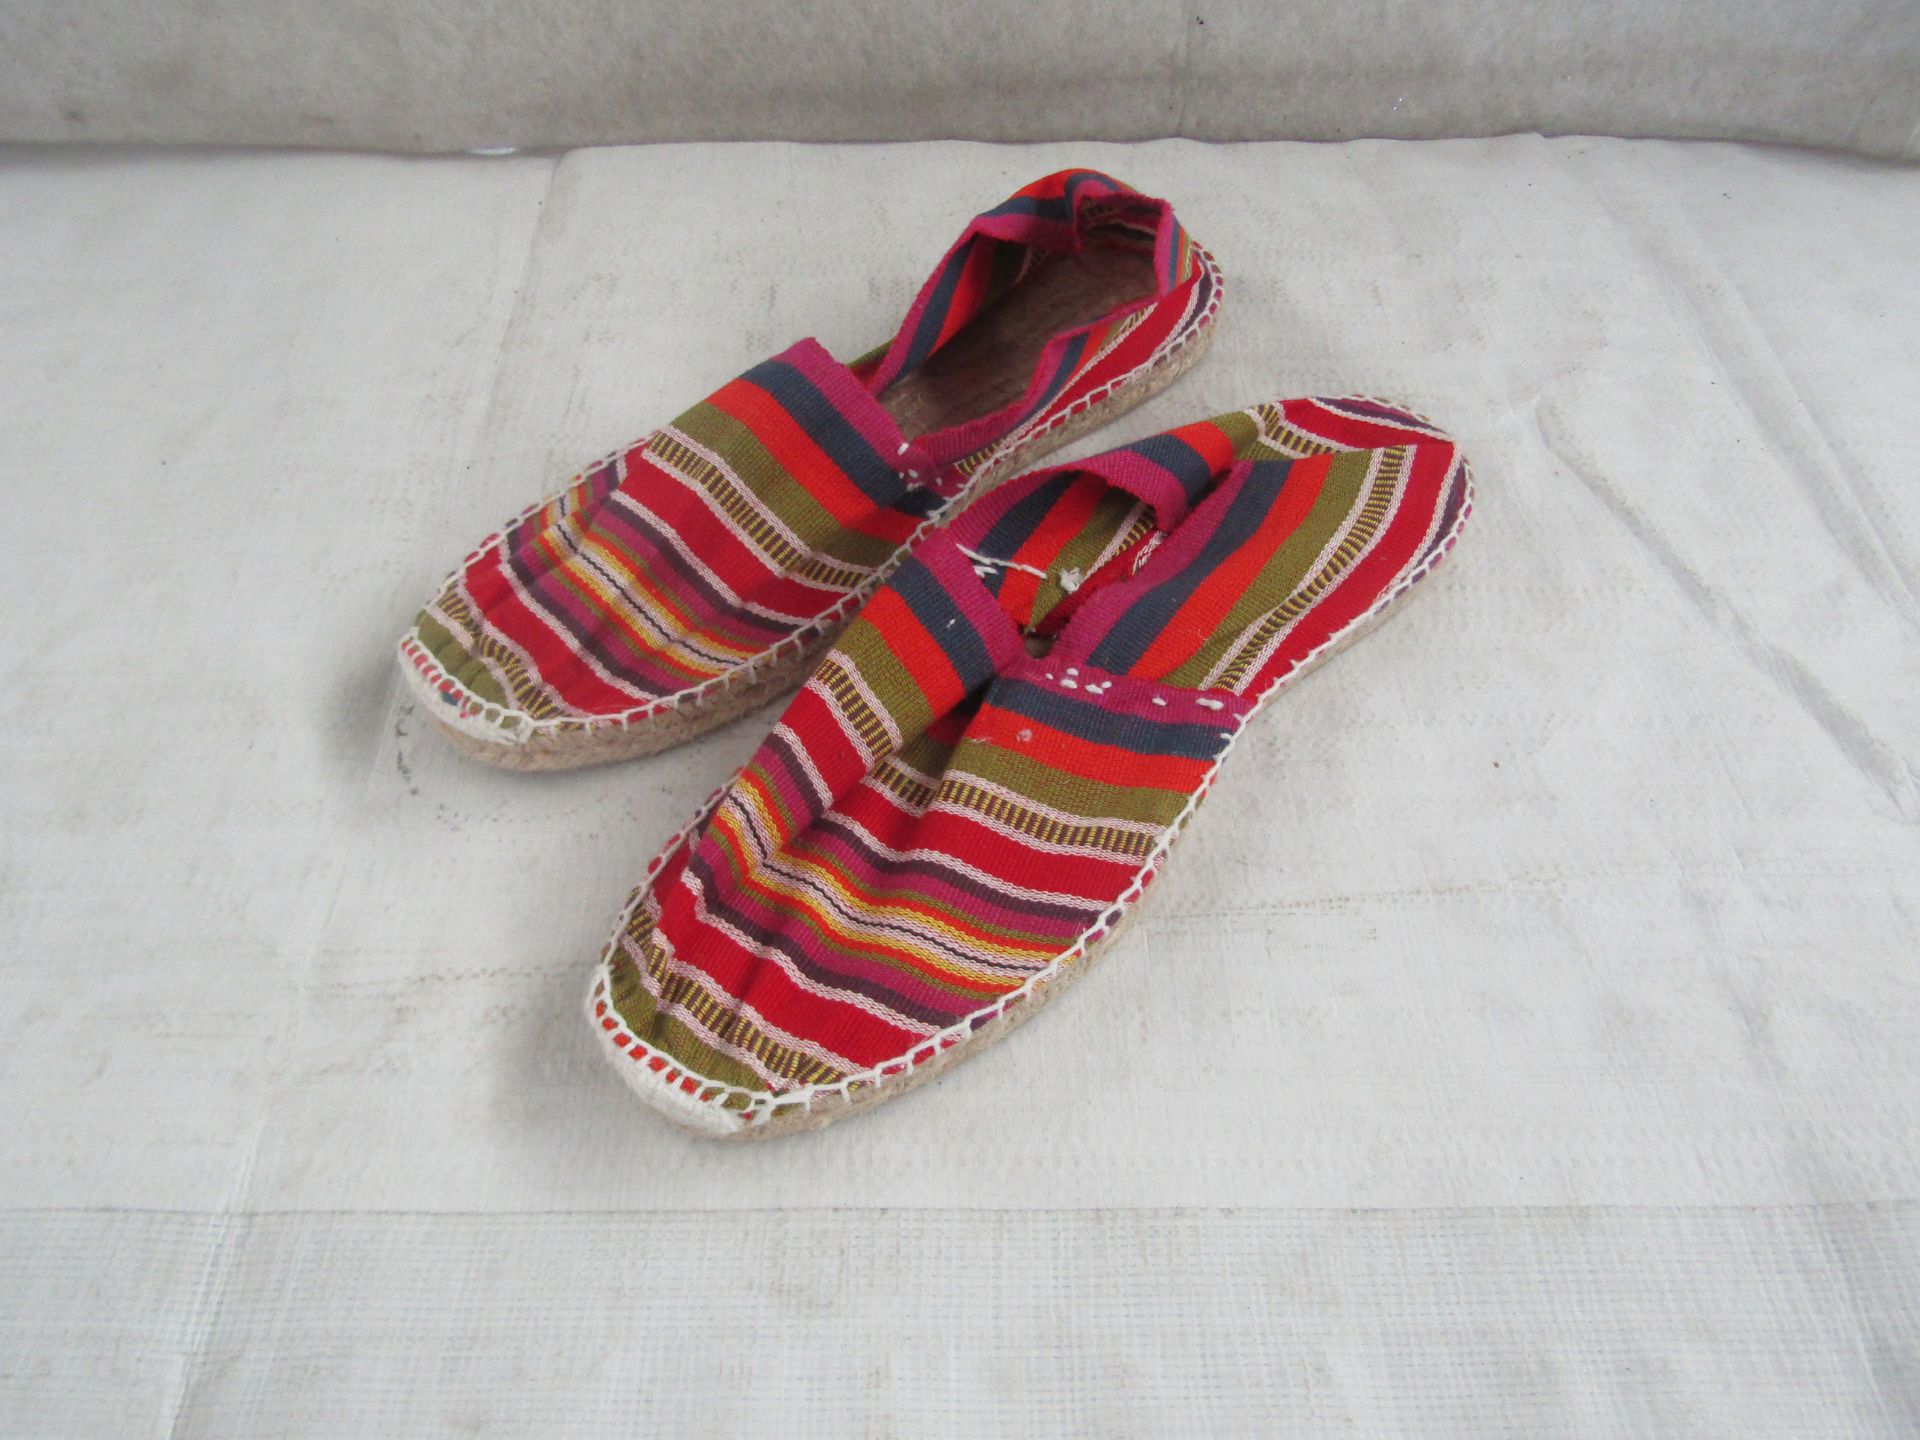 2X TheStripeCompany - Slip-On Espadrilles Shoes - See Image For Design - Size 42 - New.